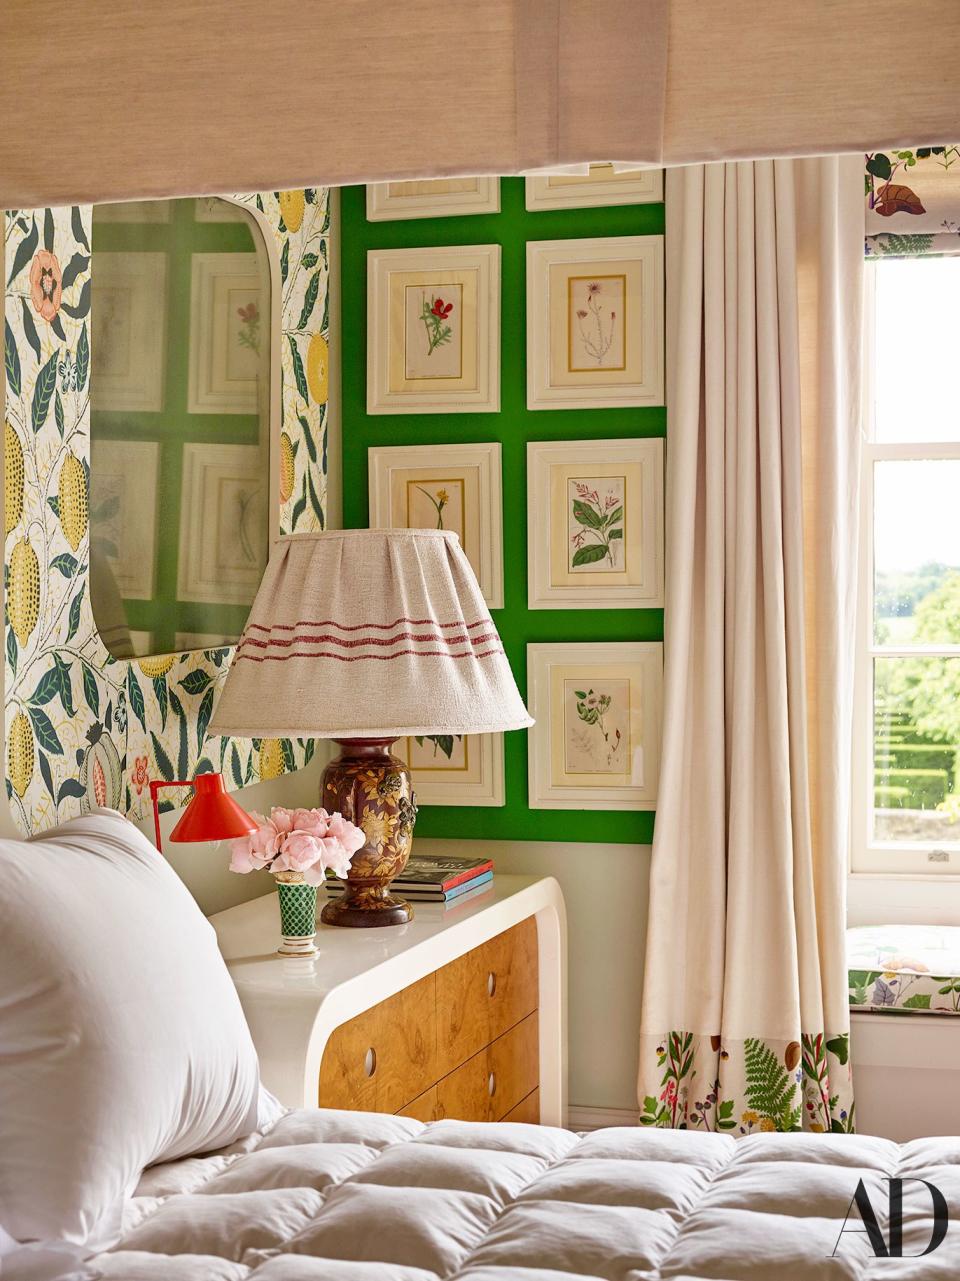 In a guest room, watercolor botanical prints are echoed in Josef Frank floral patterns.